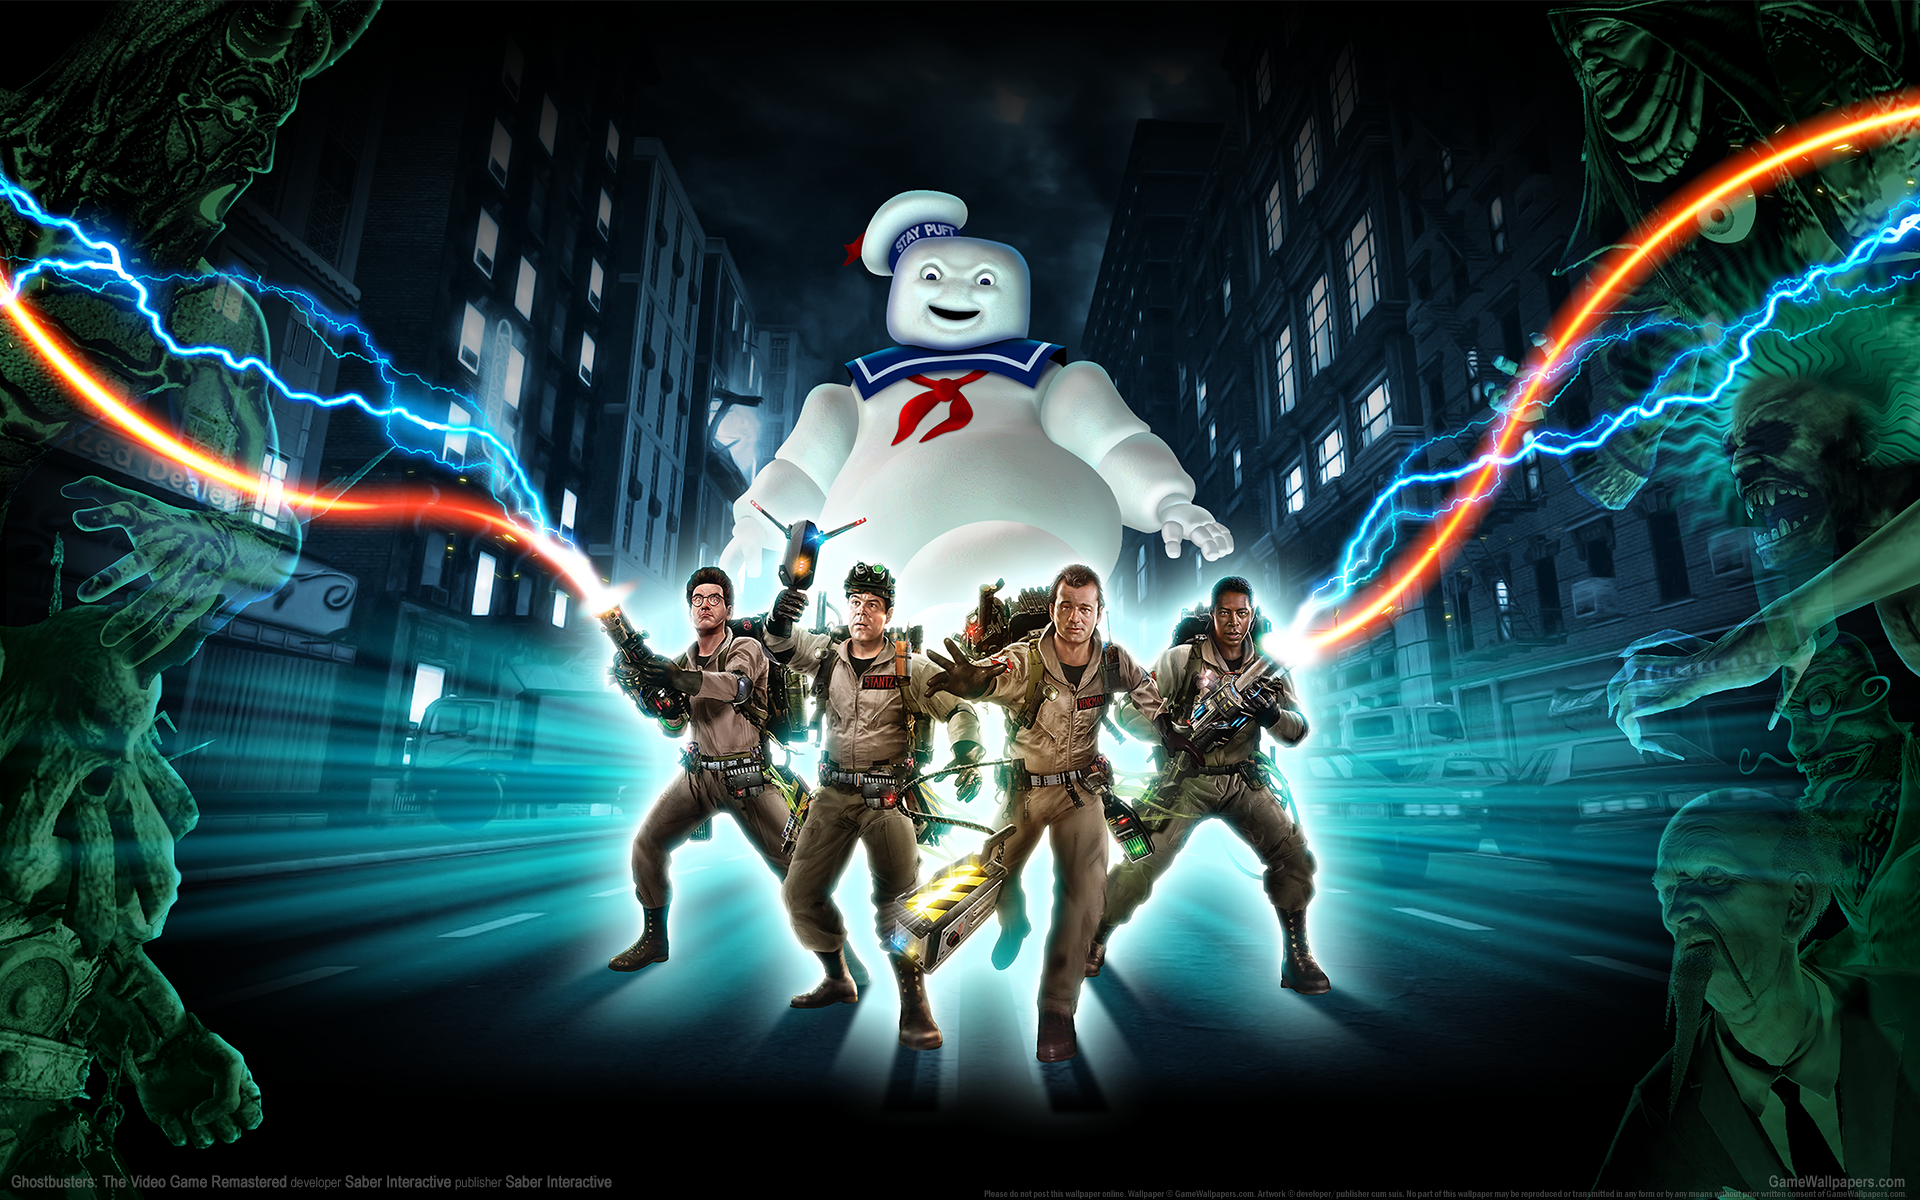 Ghostbusters: The Video Game Remastered 1920x1200 wallpaper or background 01